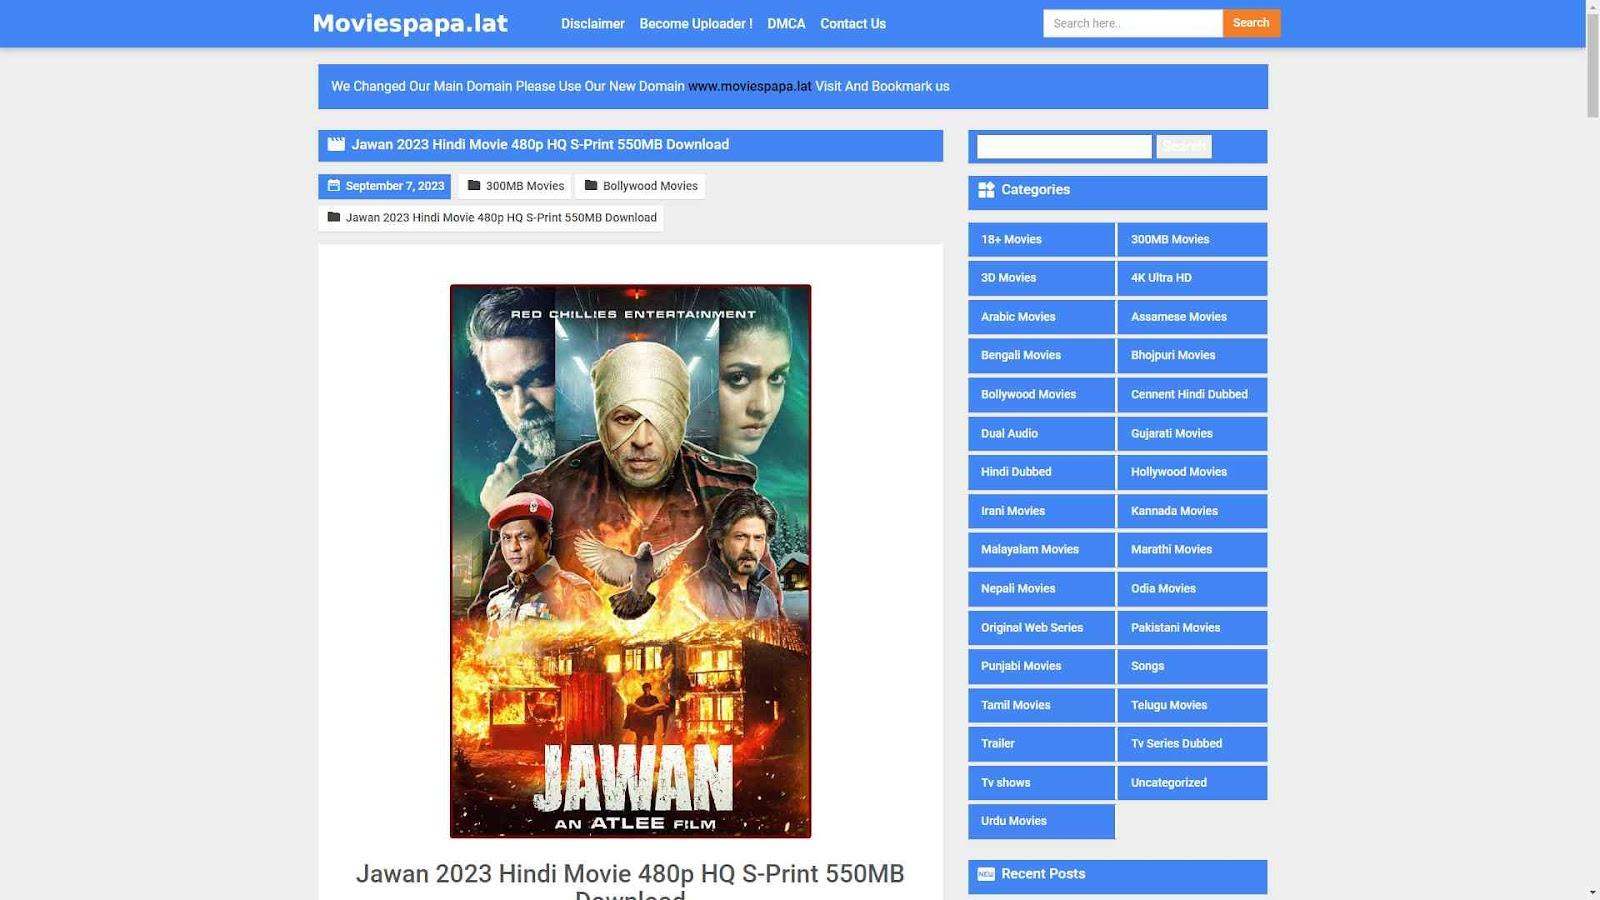 How to Access and Download Movies From Moviespapa